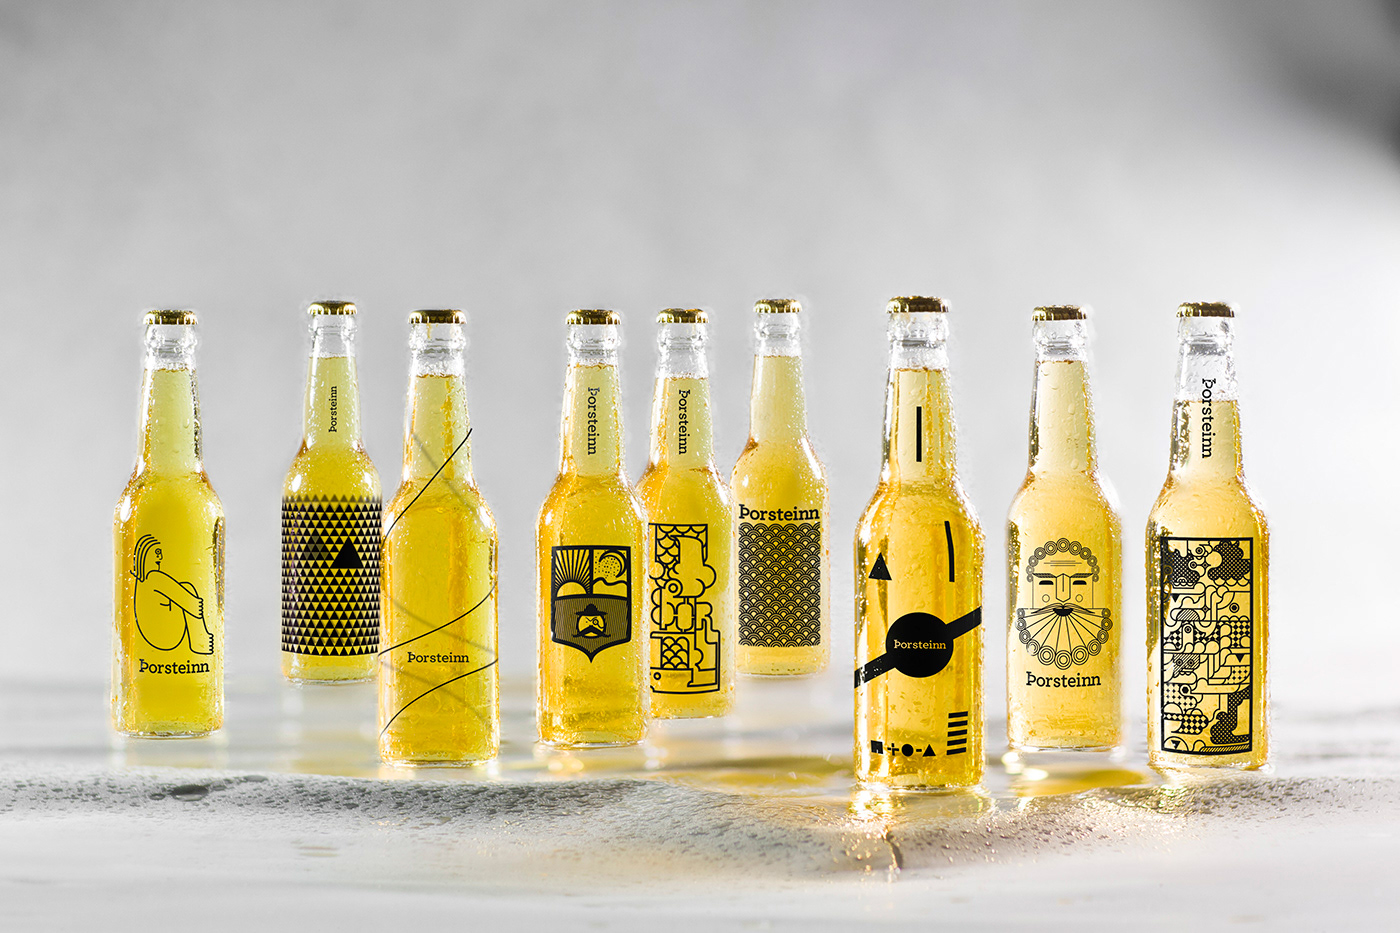 beer Thirsty drink beverage concept Patterns Triangles glass brewery fictional School Project Microbrewery iceland Reykjavik Student work